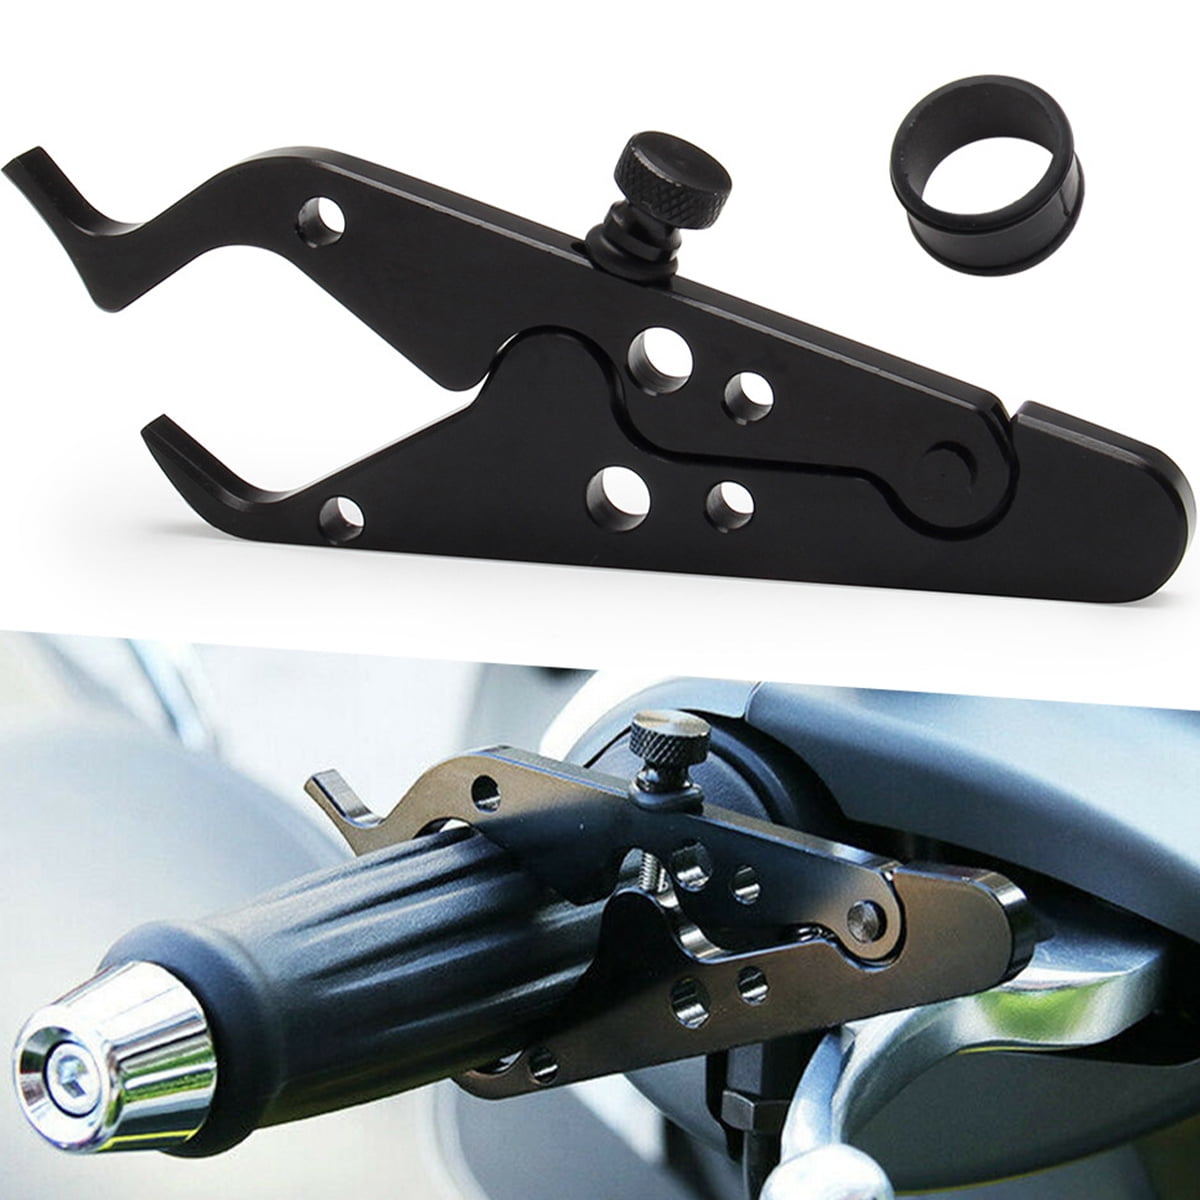 Aluminum Motorcycle Throttle Lock Cruise Control Clamp Scooter